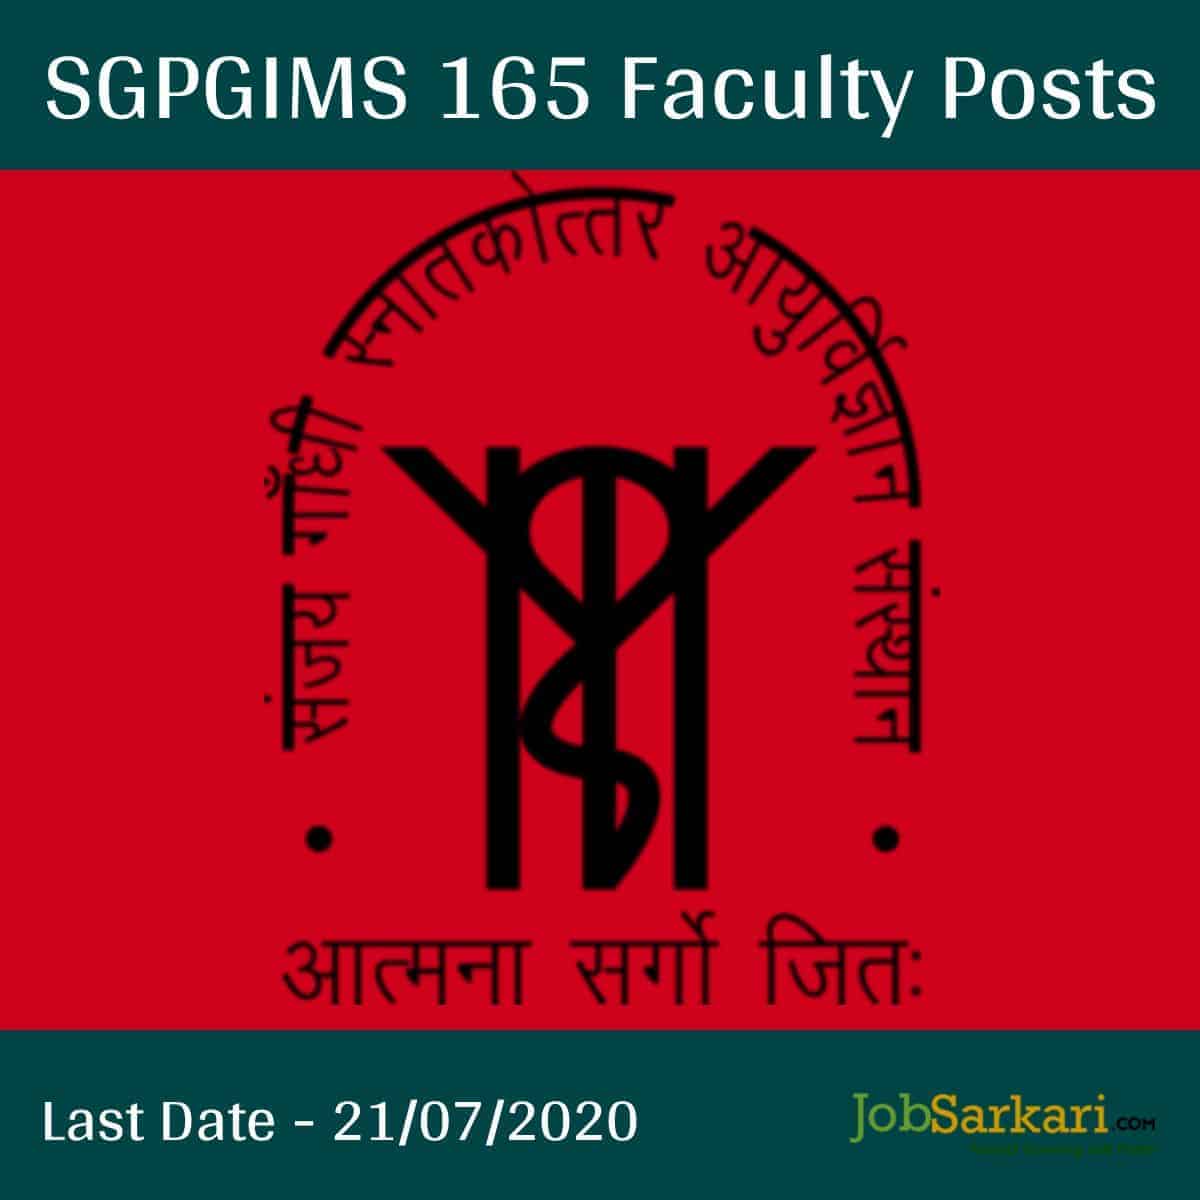 SGPGIMS 165 Faculty Posts